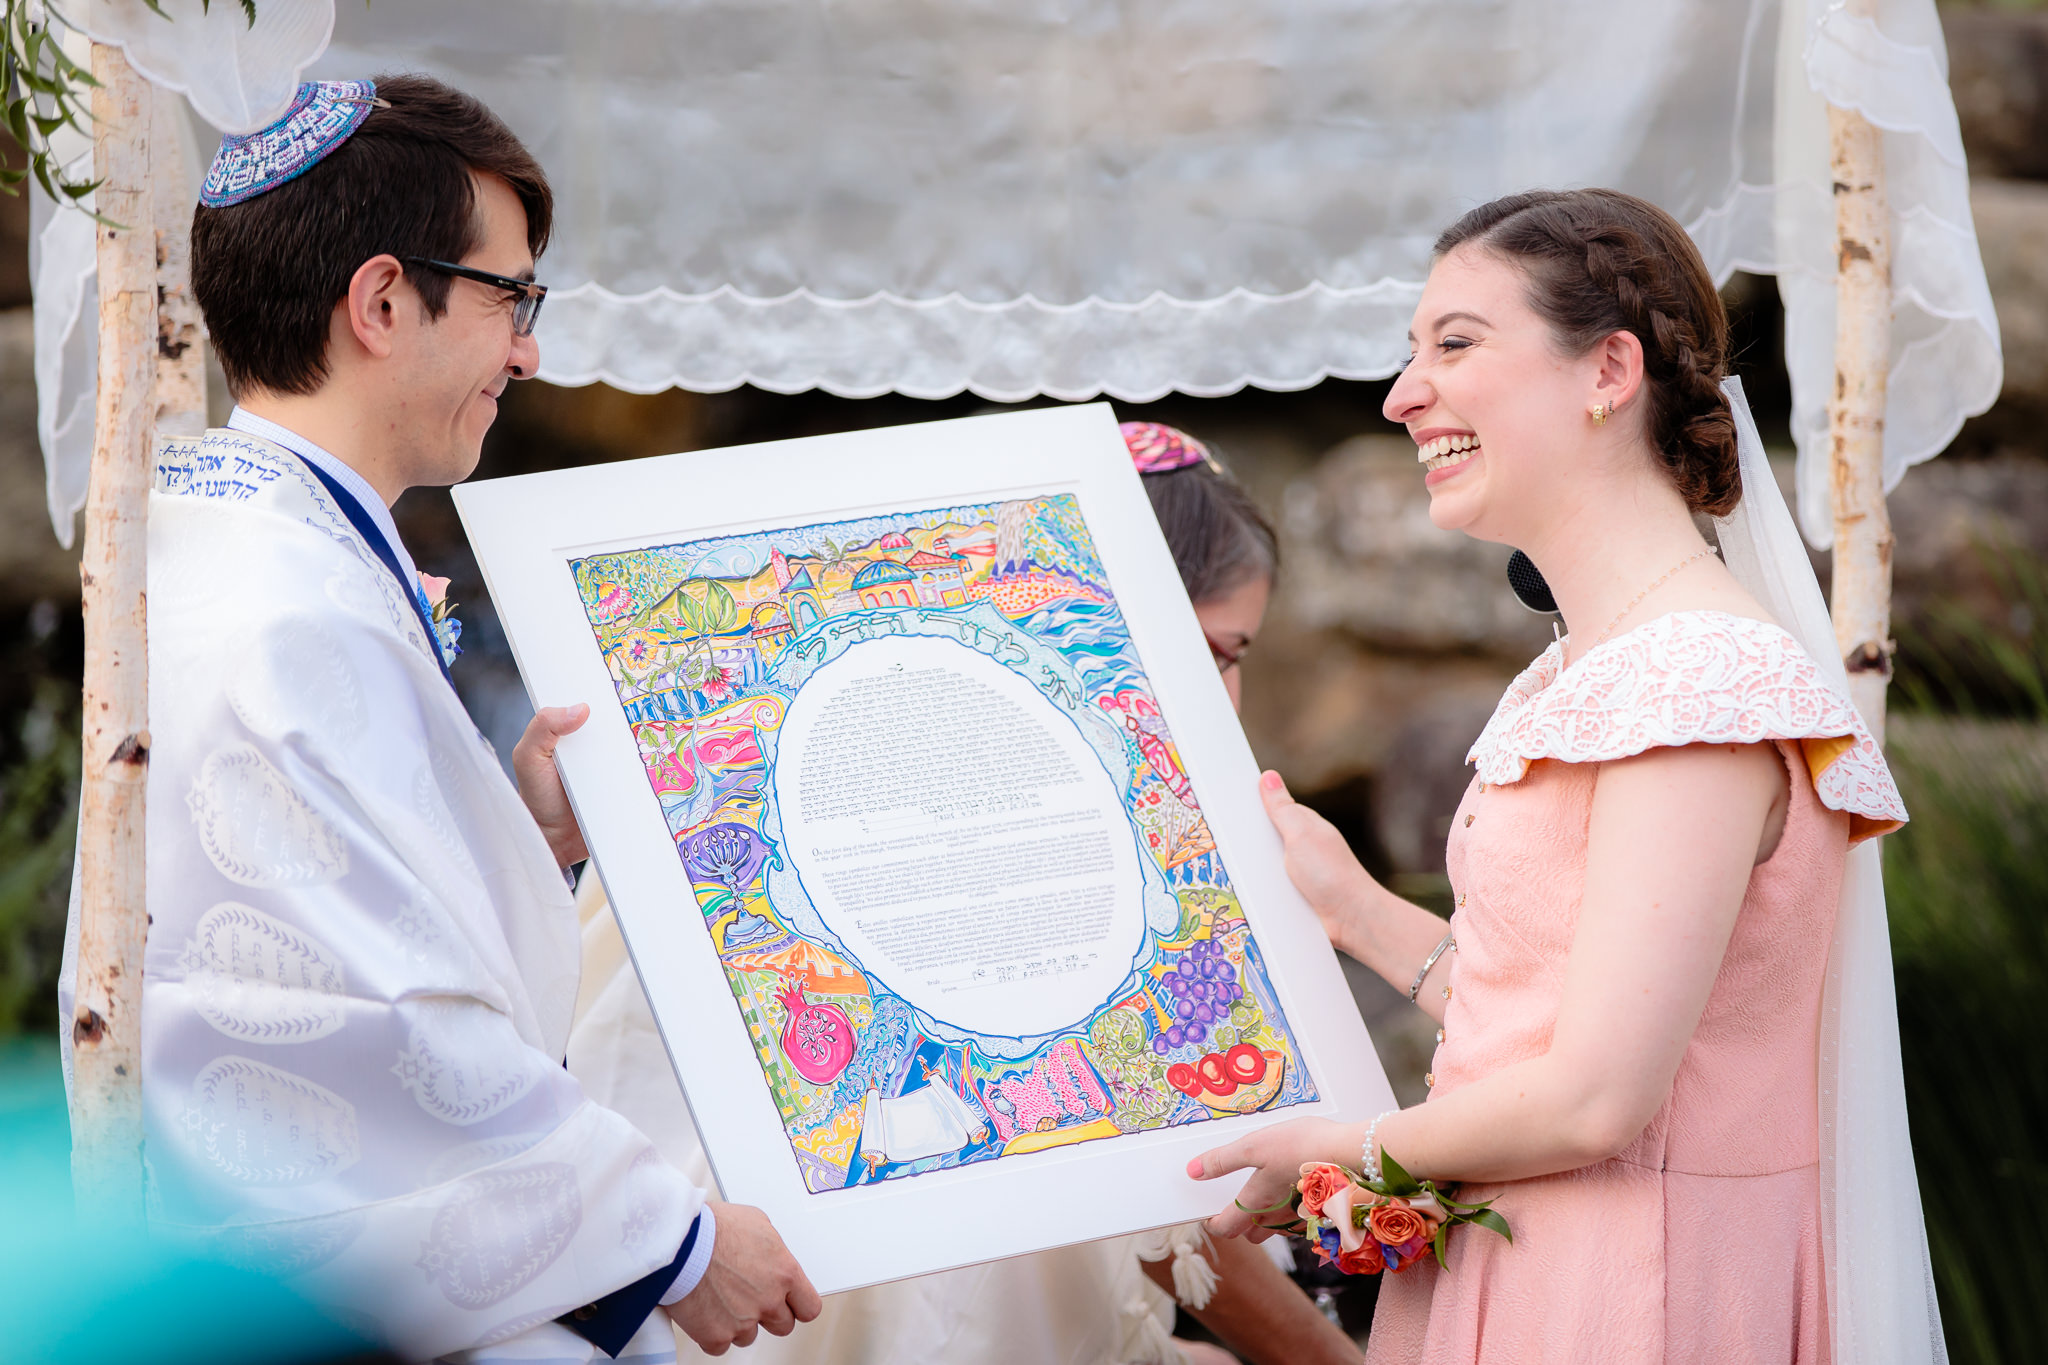 Bride & groom laugh as they read the Ketubah contract aloud during their Jewish wedding ceremony at Phipps Conservatory